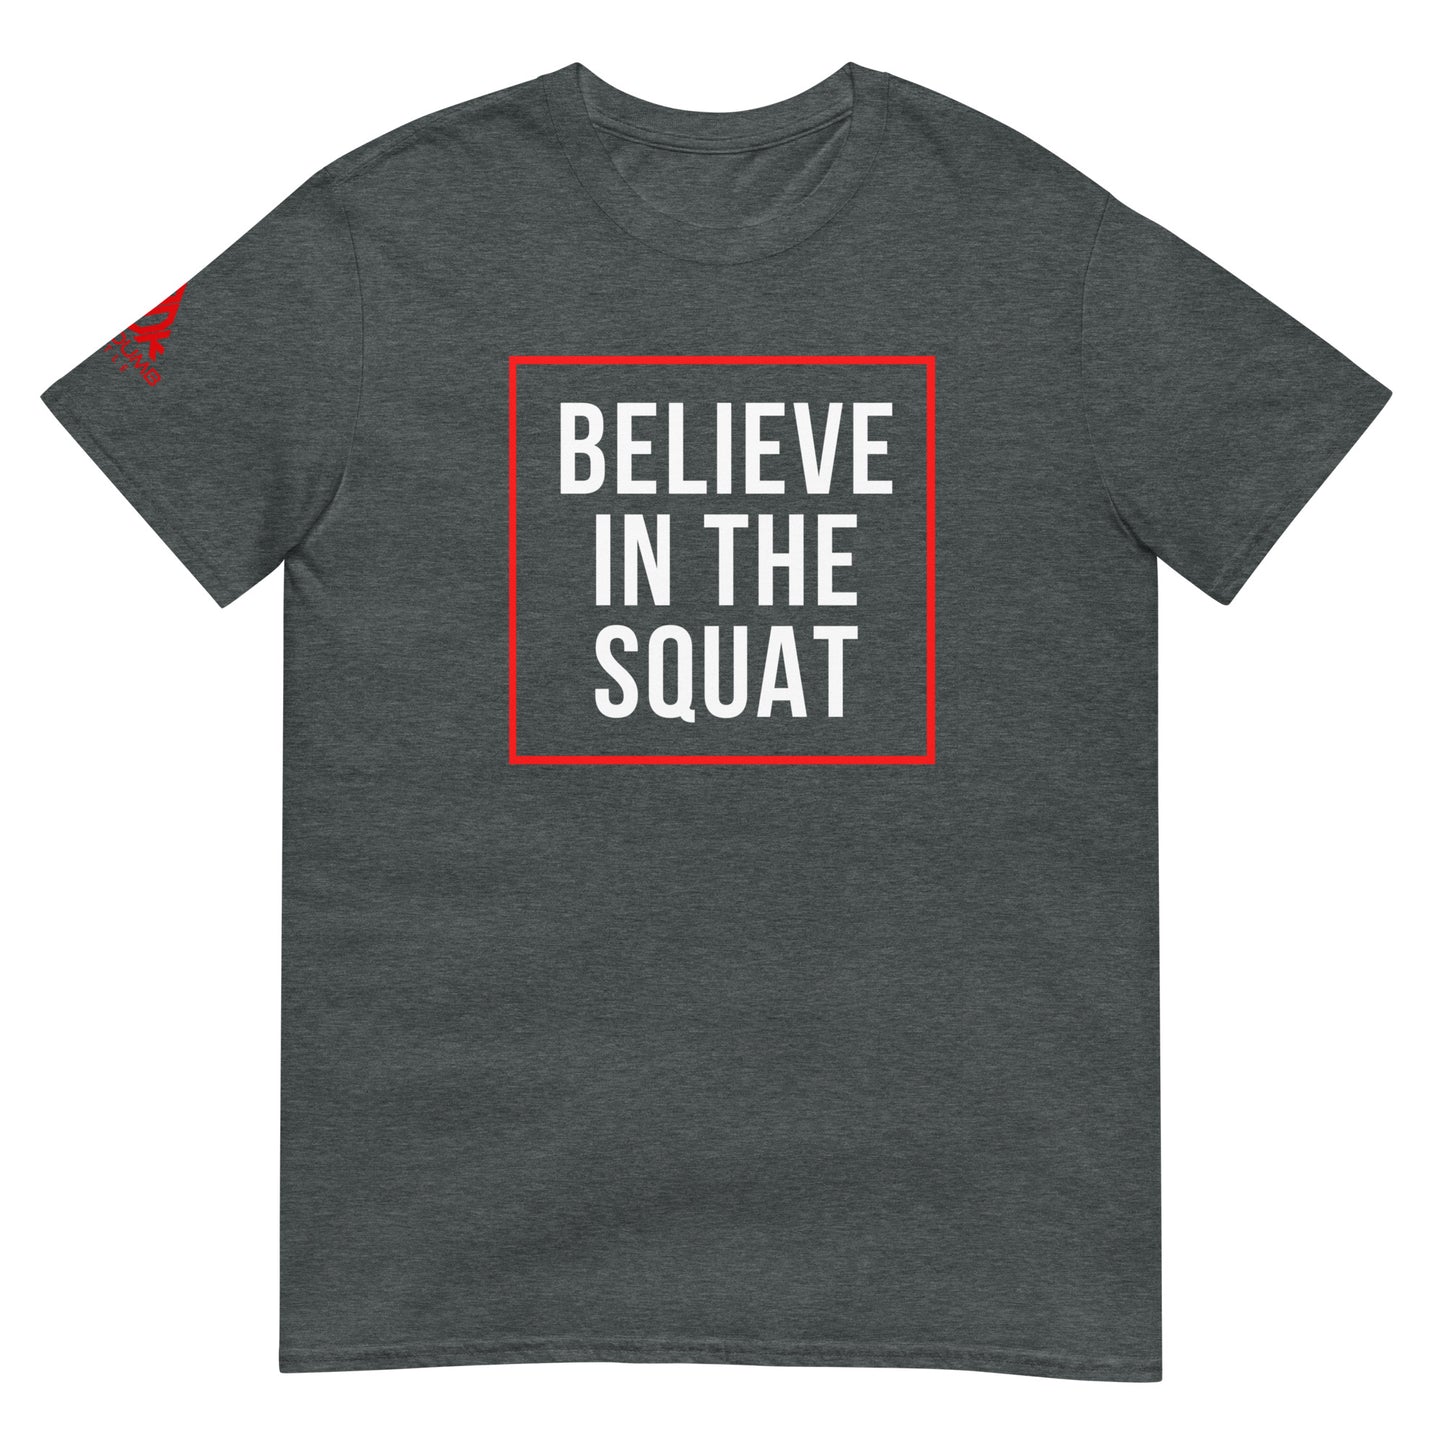 Believe in the Squat Short Sleeve